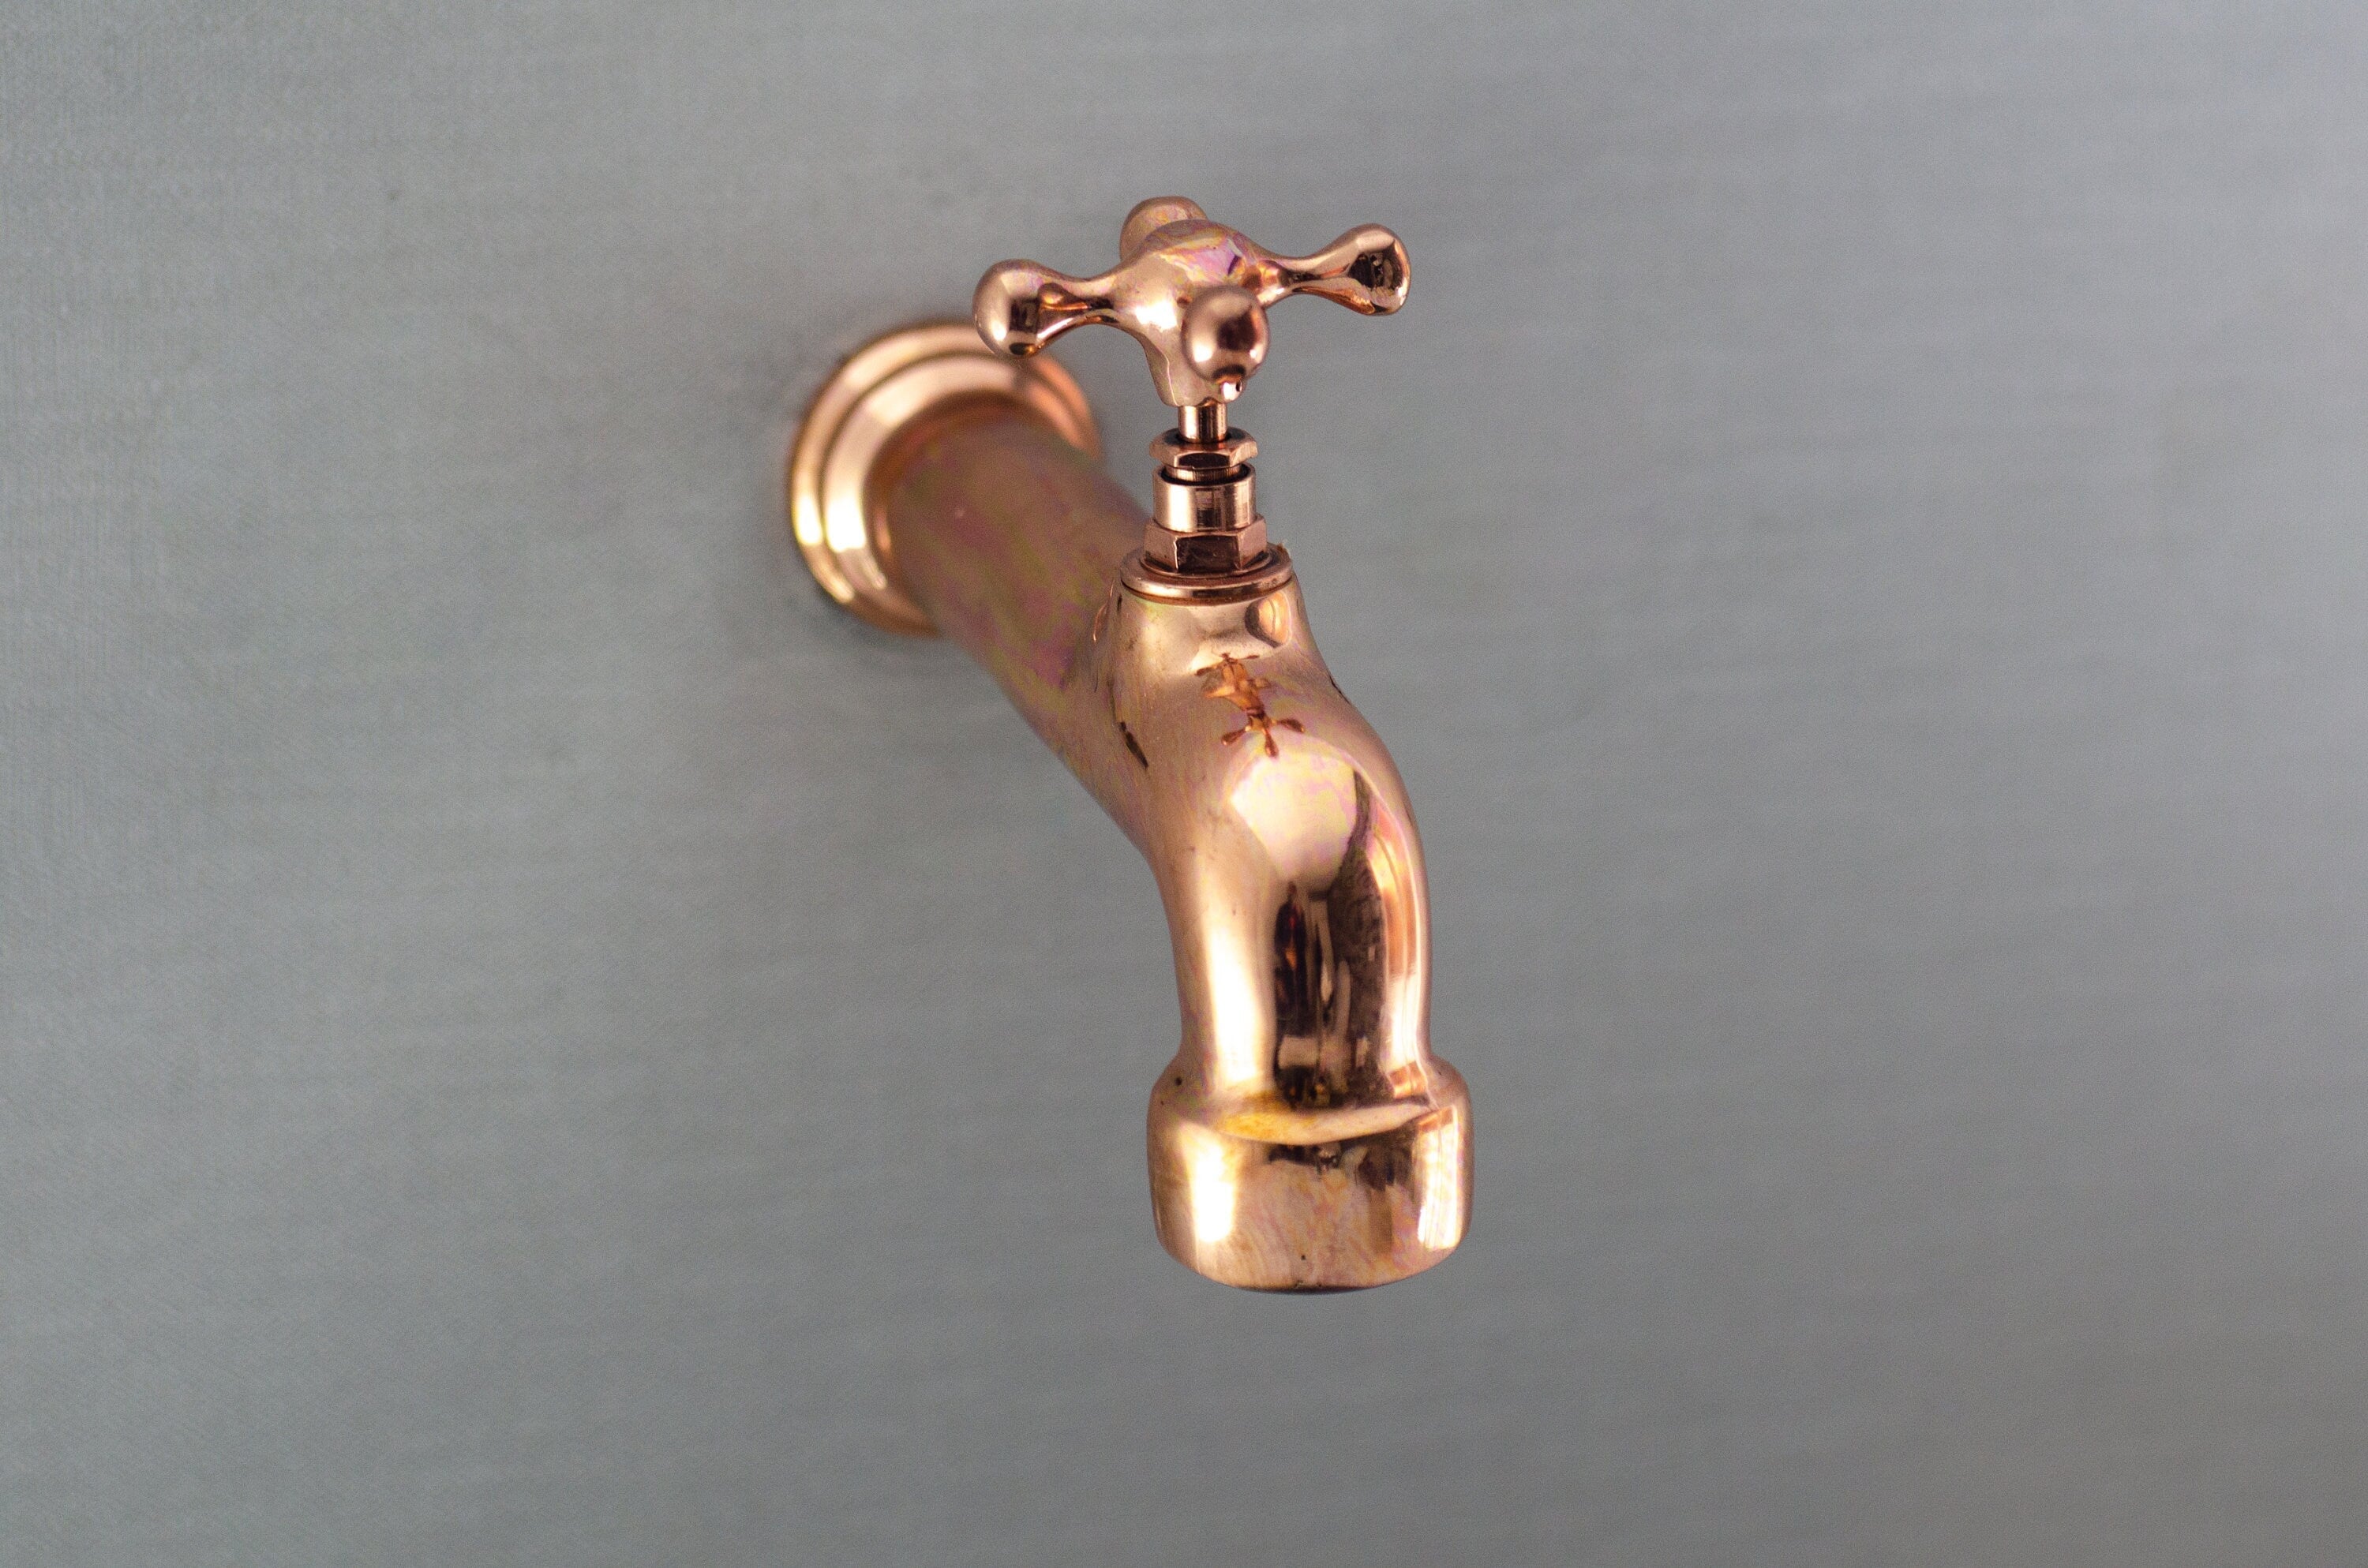 Traditional Tub Filler, Copper Finish Faucet, Handmade Vintage Water Tap